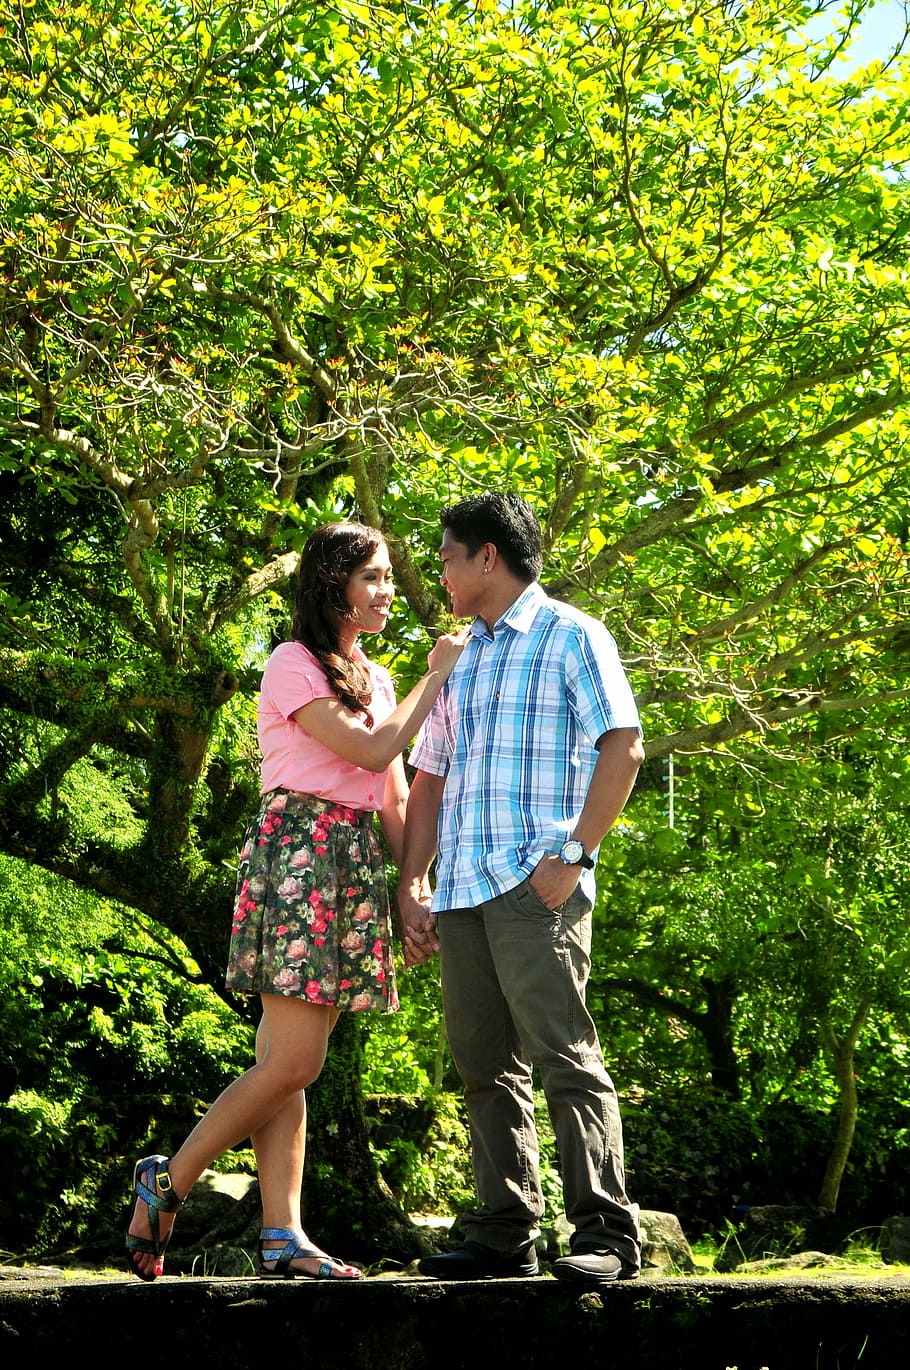 pre nuptial, couple, love, indonesia, indonesian, man, woman, togetherness, two people, plant